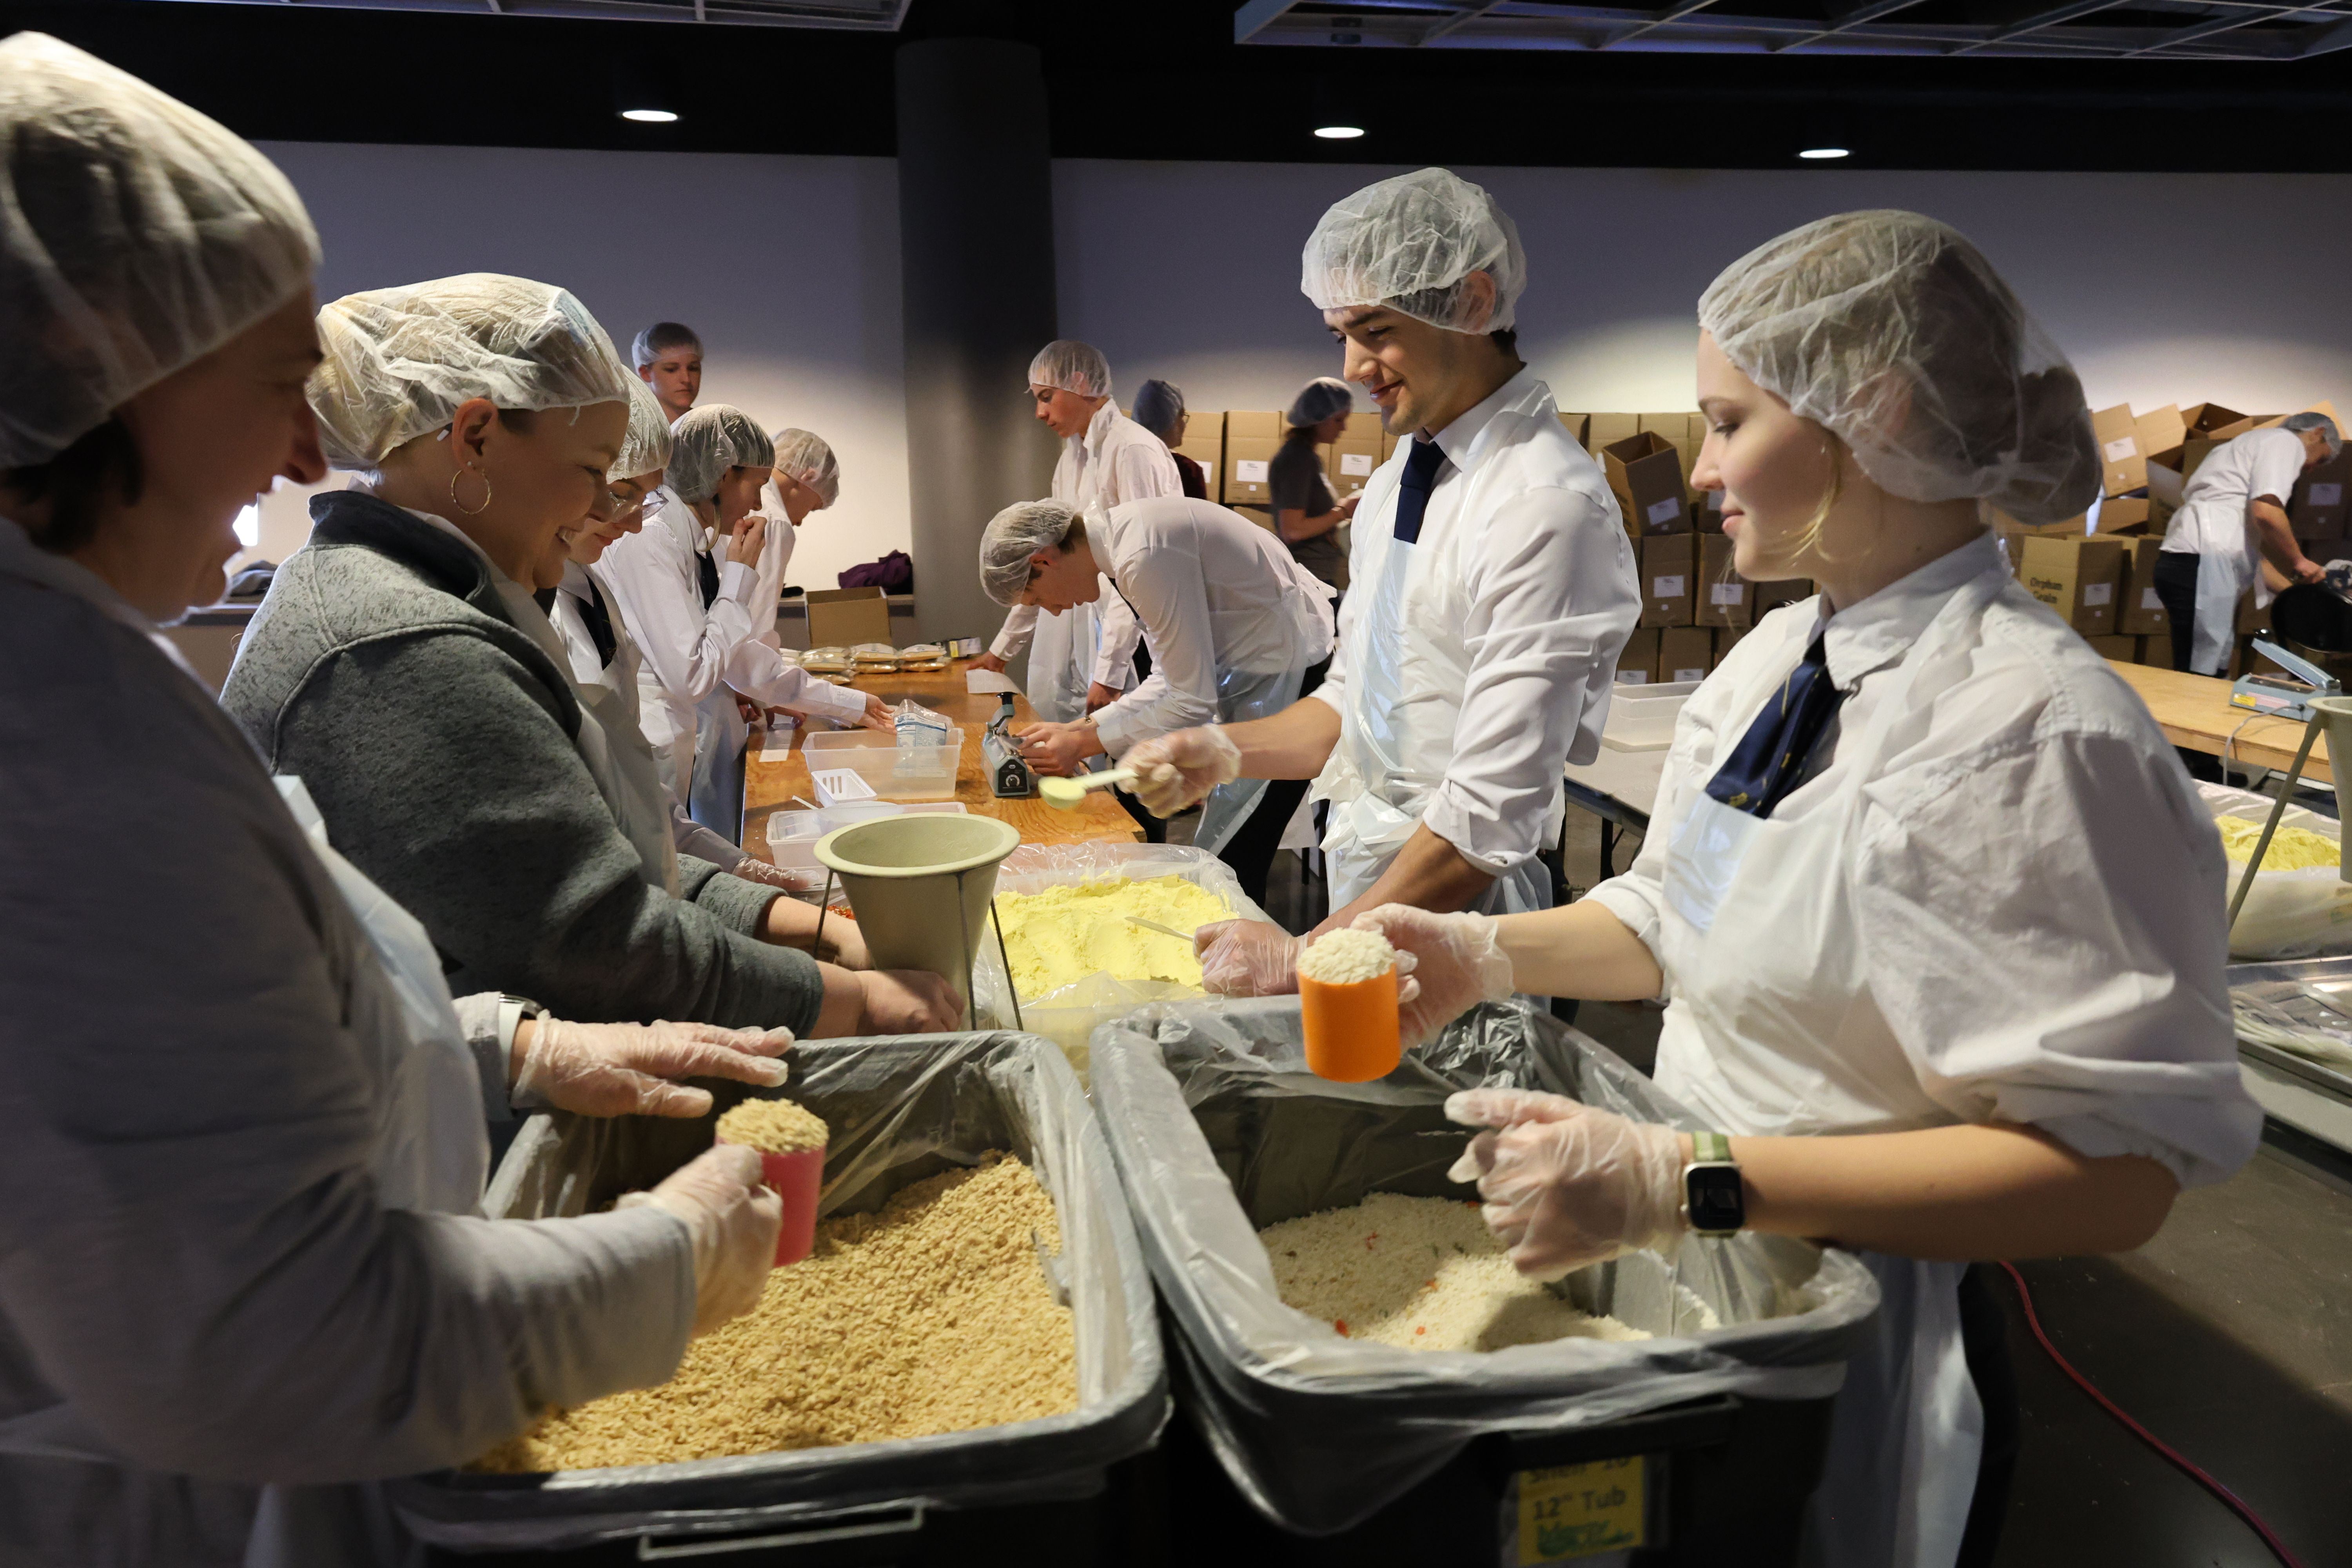 FFA Members Practice “Living to Serve” During State Convention